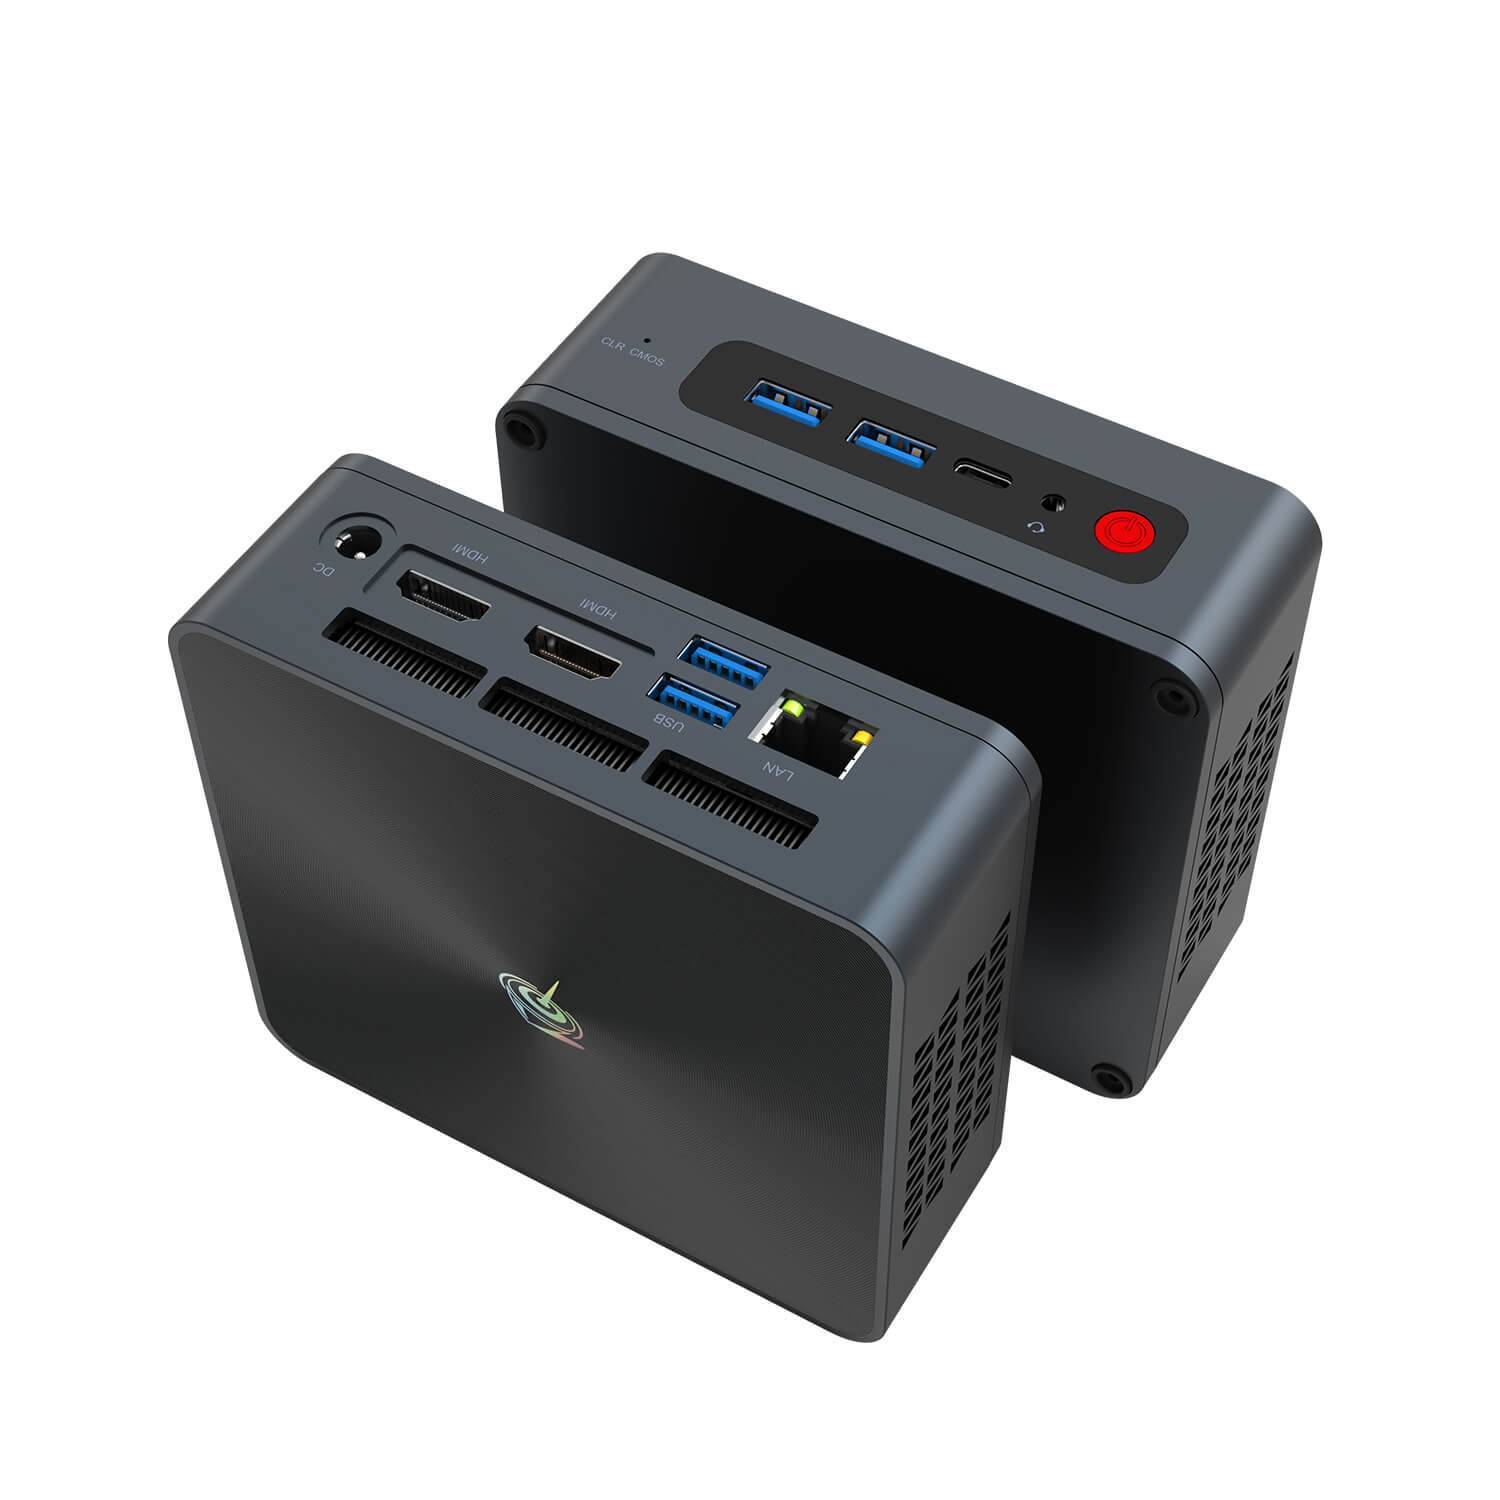 Beelink SEi 8 Windows 10 Intel Mini NUC PC - Showing from front the back with LAN Port, 2x USB Type-A 3.0 and 2 HDMI Ports and from the front with 2x USB Type-A 3.0 and Type-C